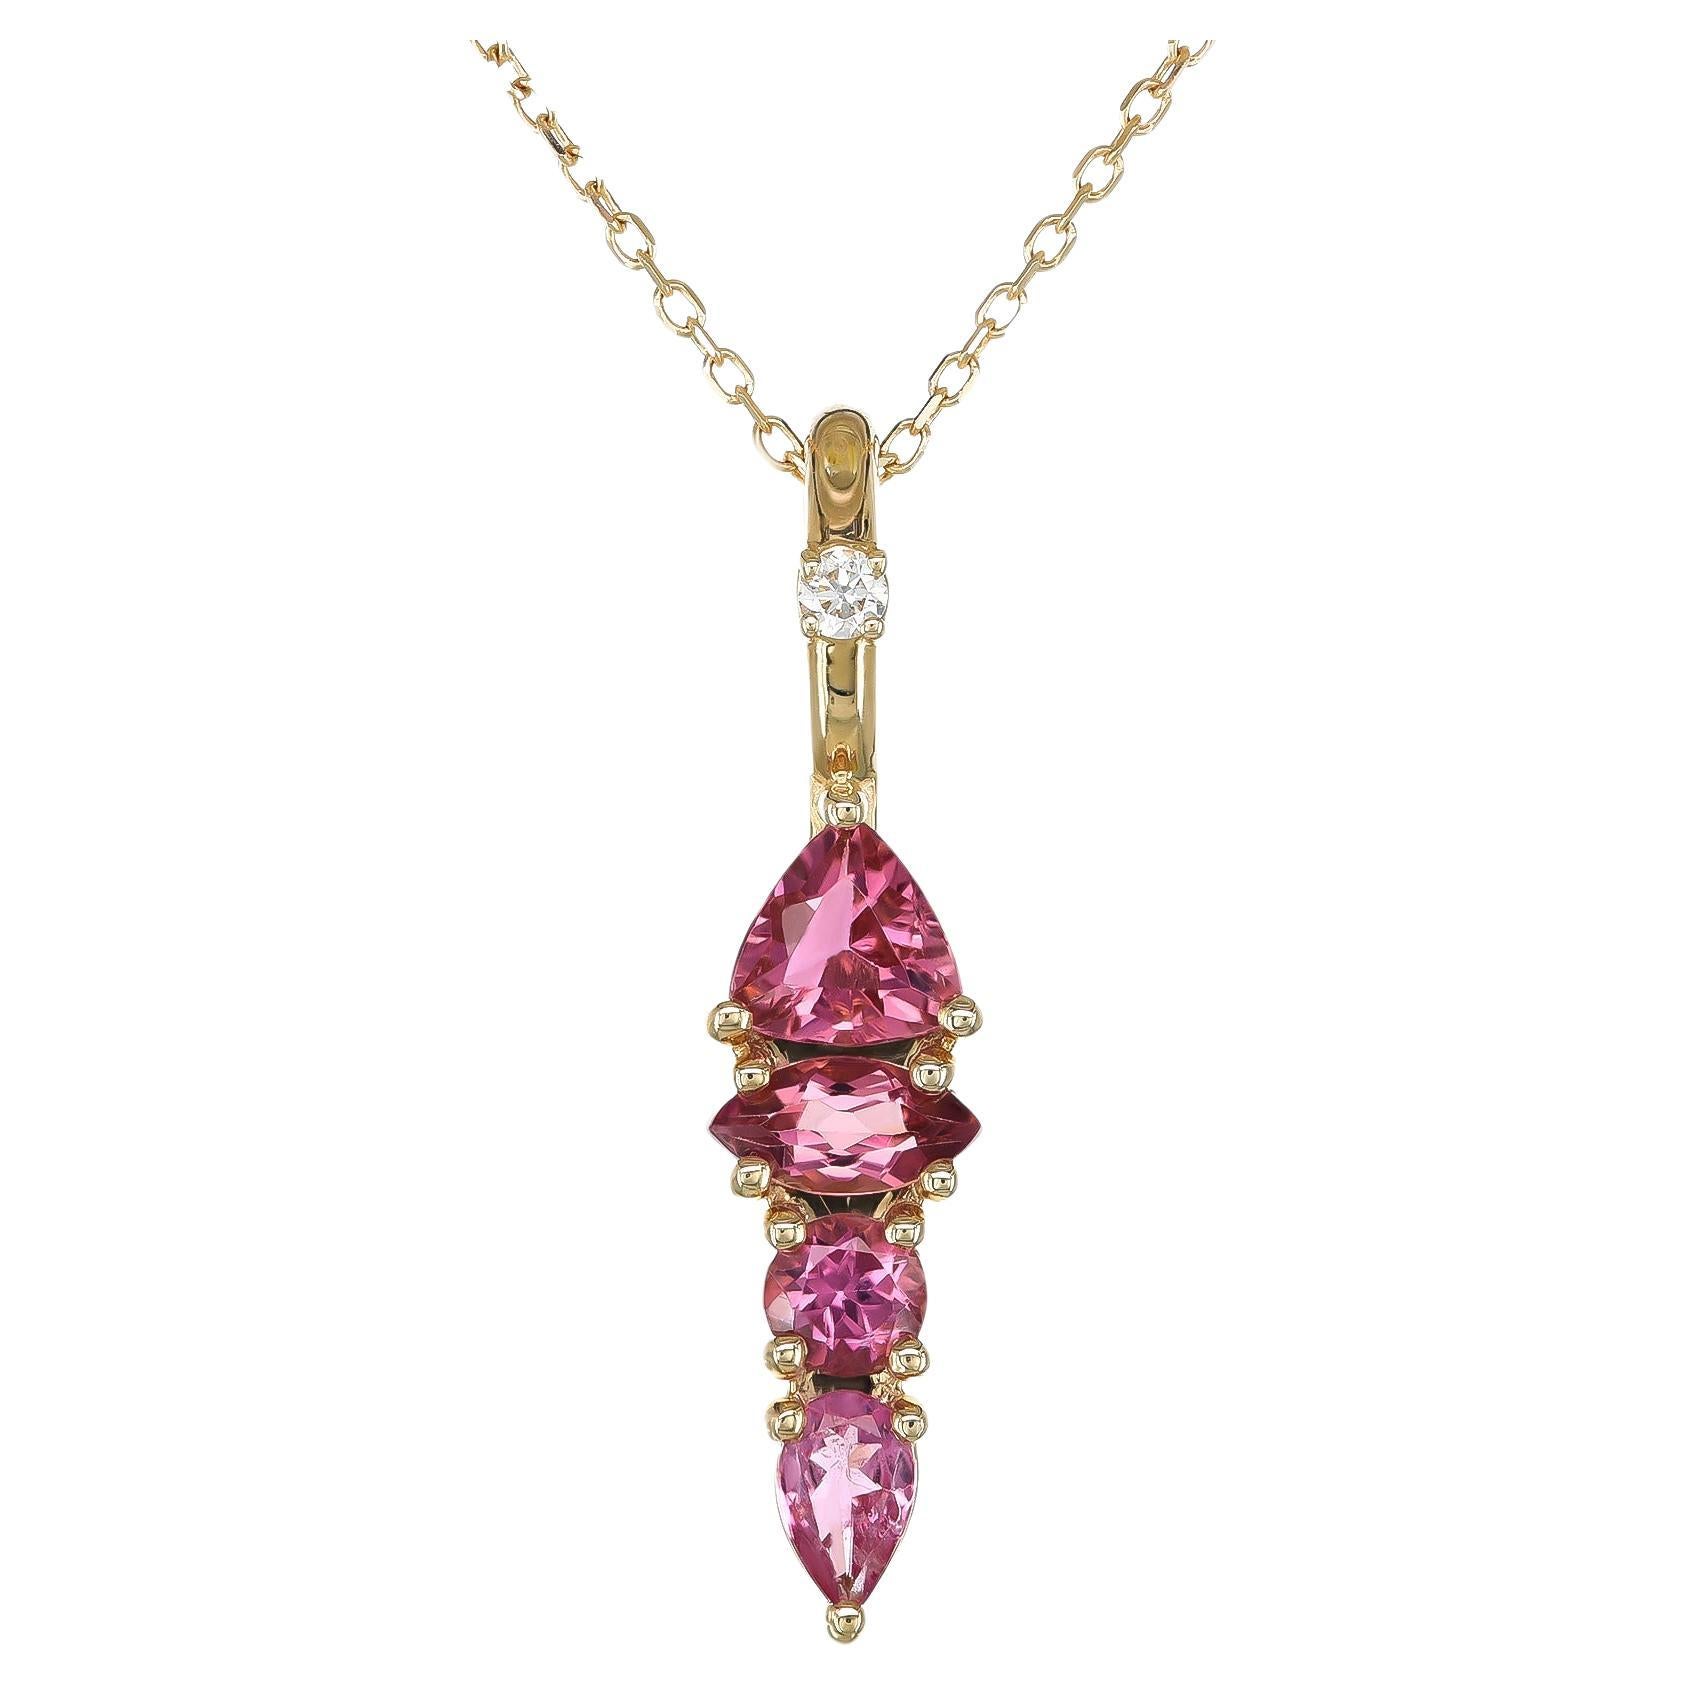 Pendant with 0.96 carats Pink Tourmaline Diamonds set in 14K Yellow Gold For Sale